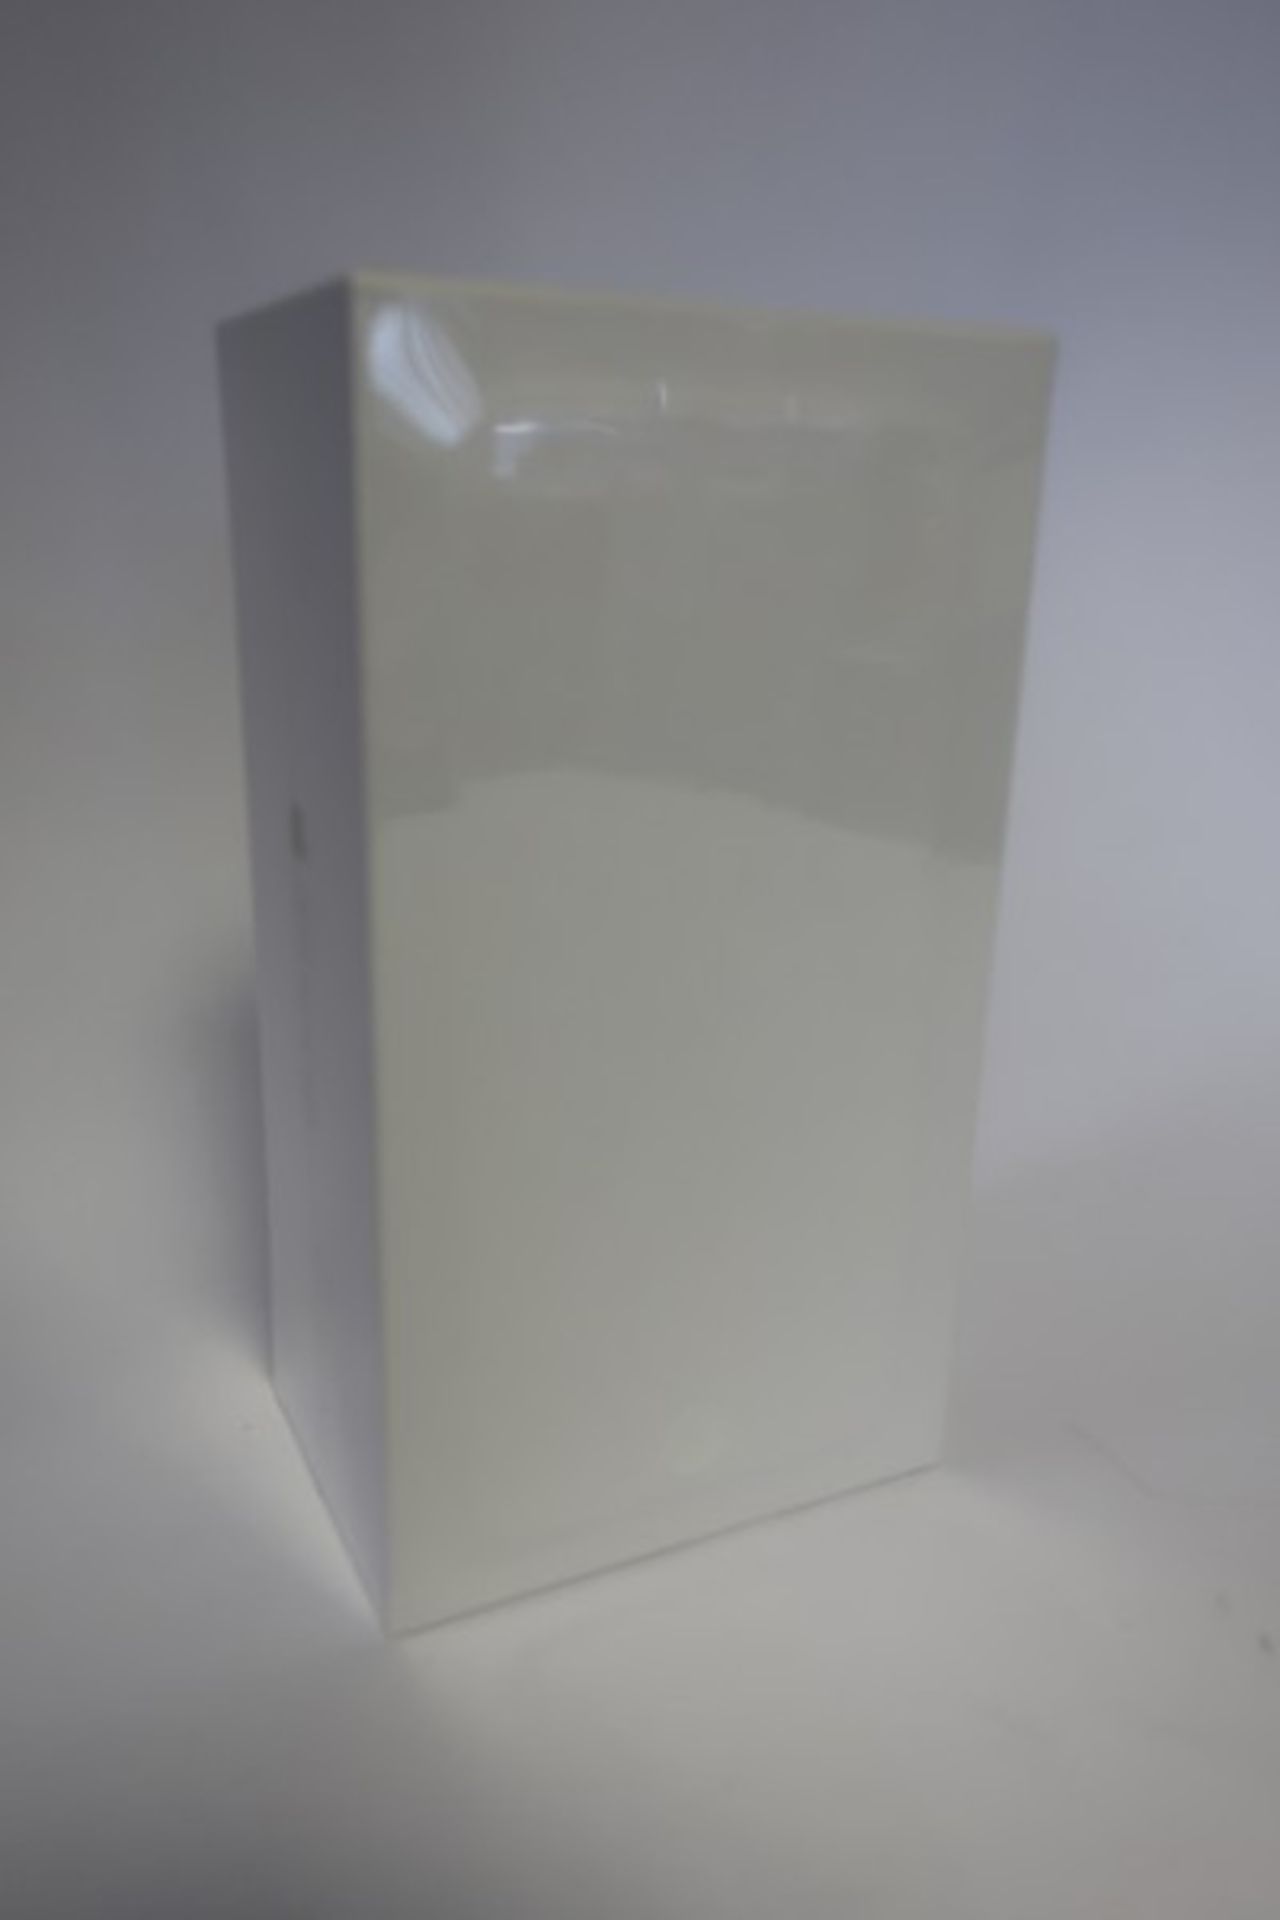 A boxed as new iPhone 6 16GB model A1586 in Silver (IMEI; 359228065570834).